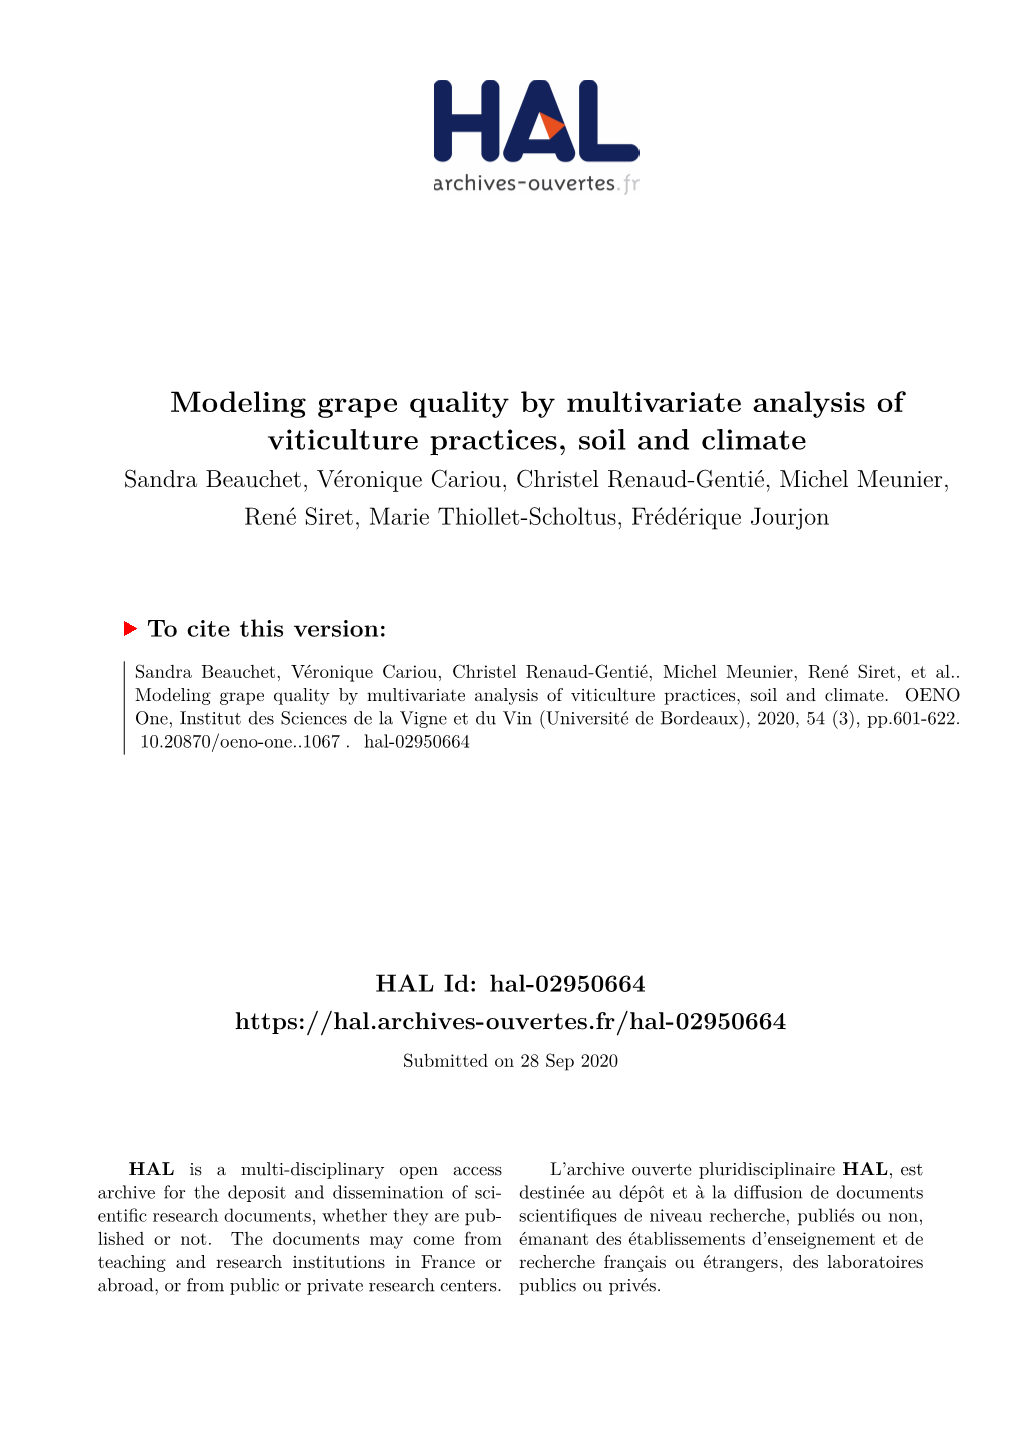 Modeling Grape Quality by Multivariate Analysis of Viticulture Practices, Soil